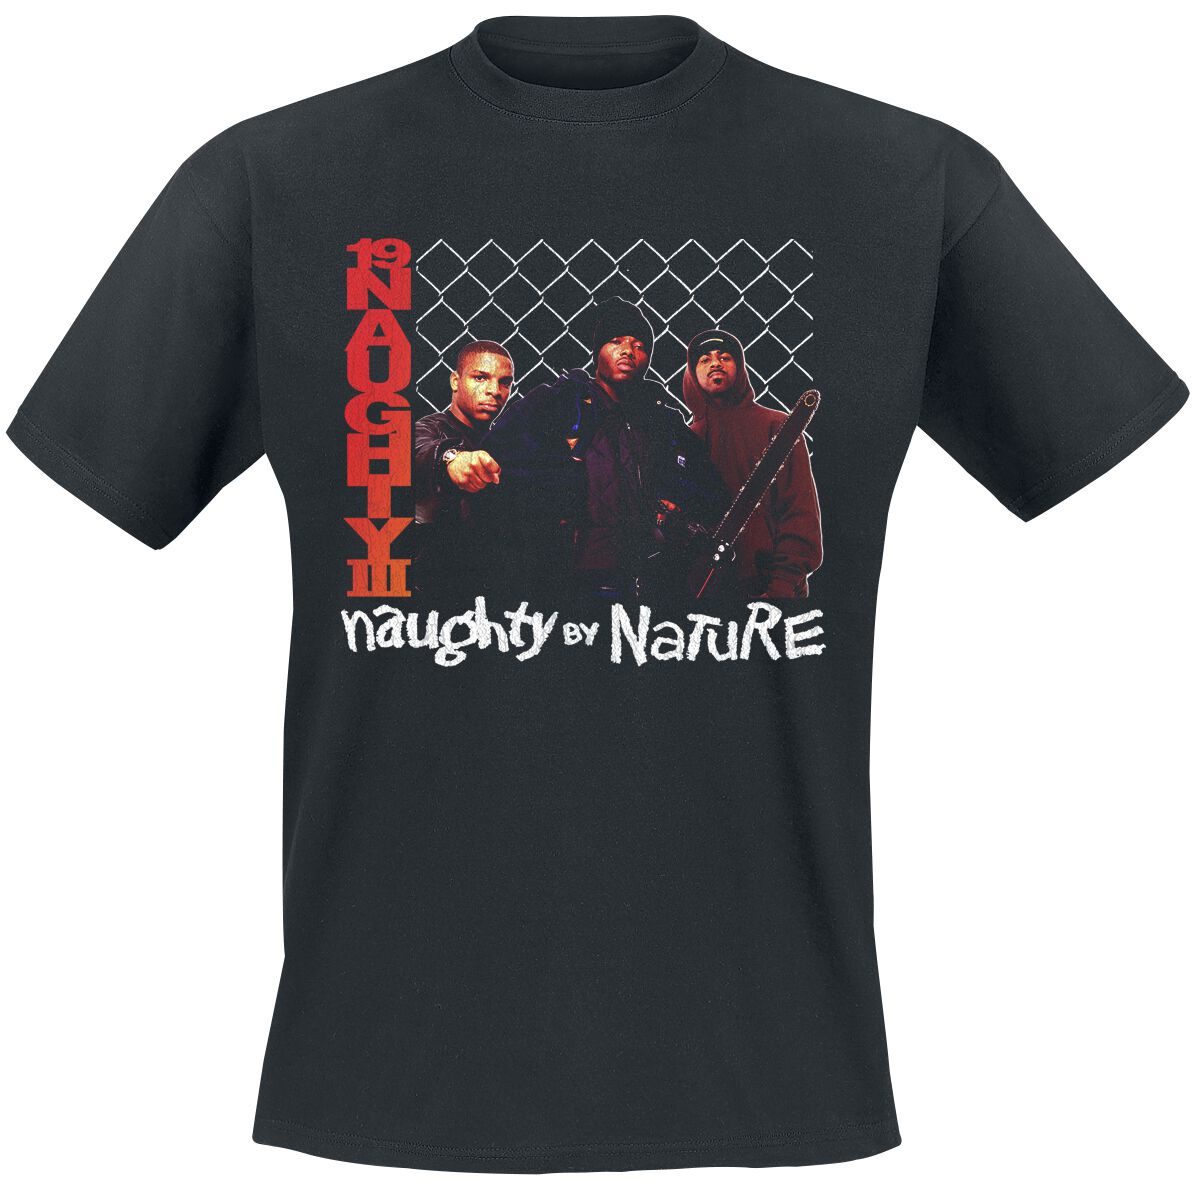 Naughty by Nature 19 Naughty 111 T-Shirt schwarz in 3XL